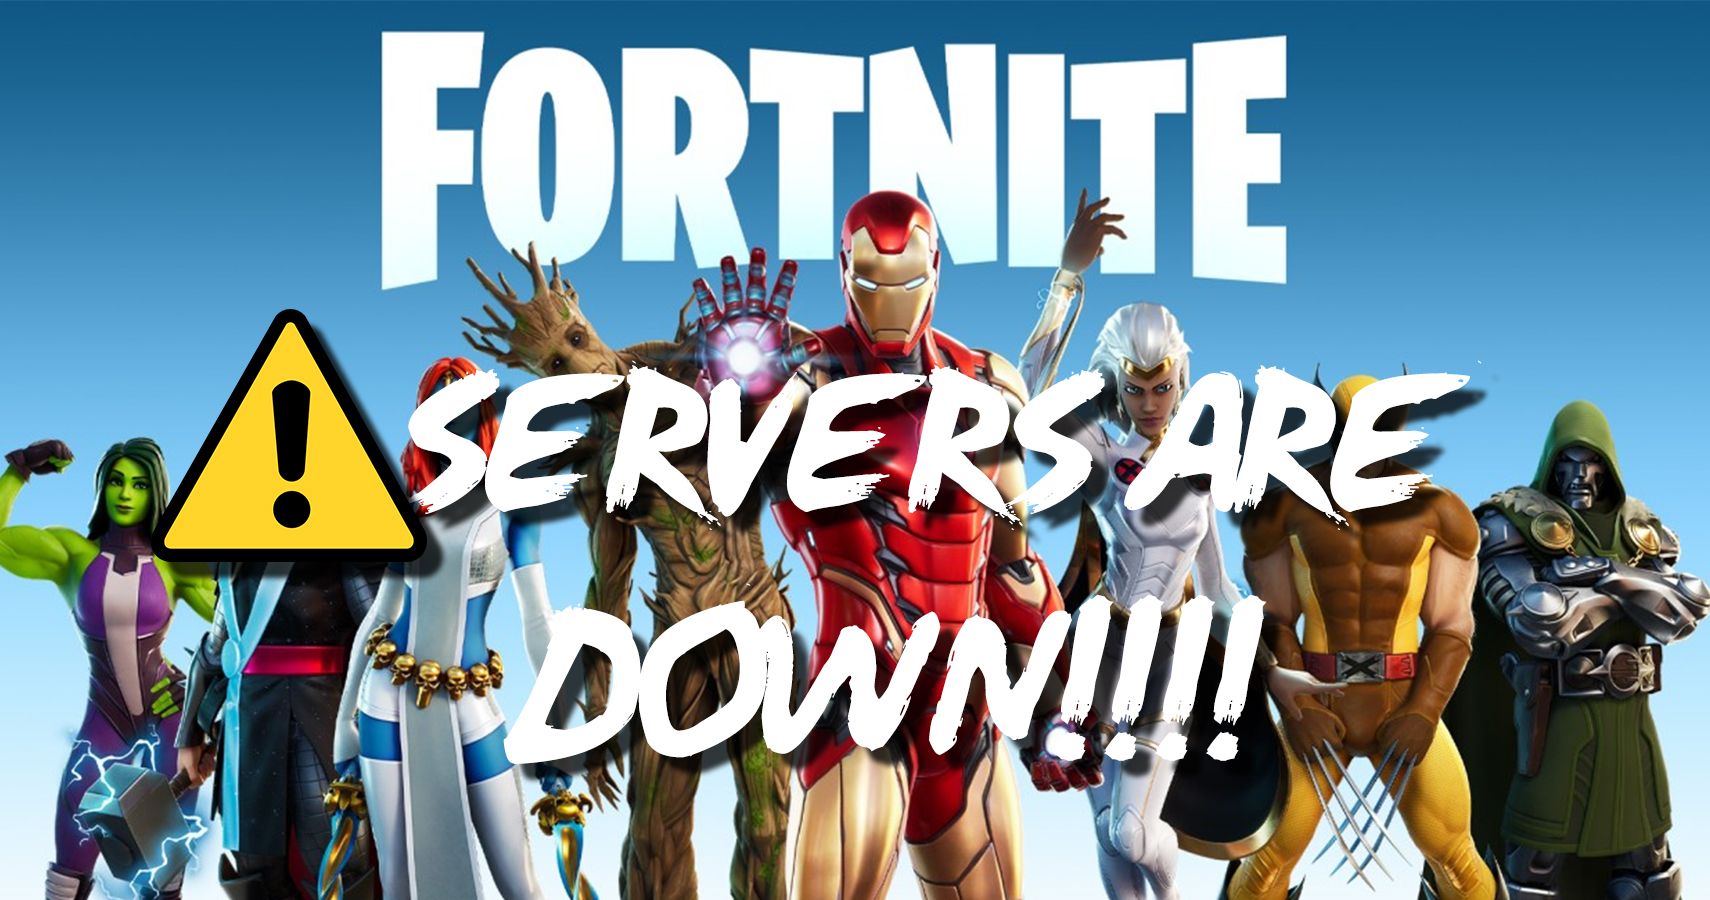 Fortnite Marvel event background with servers down